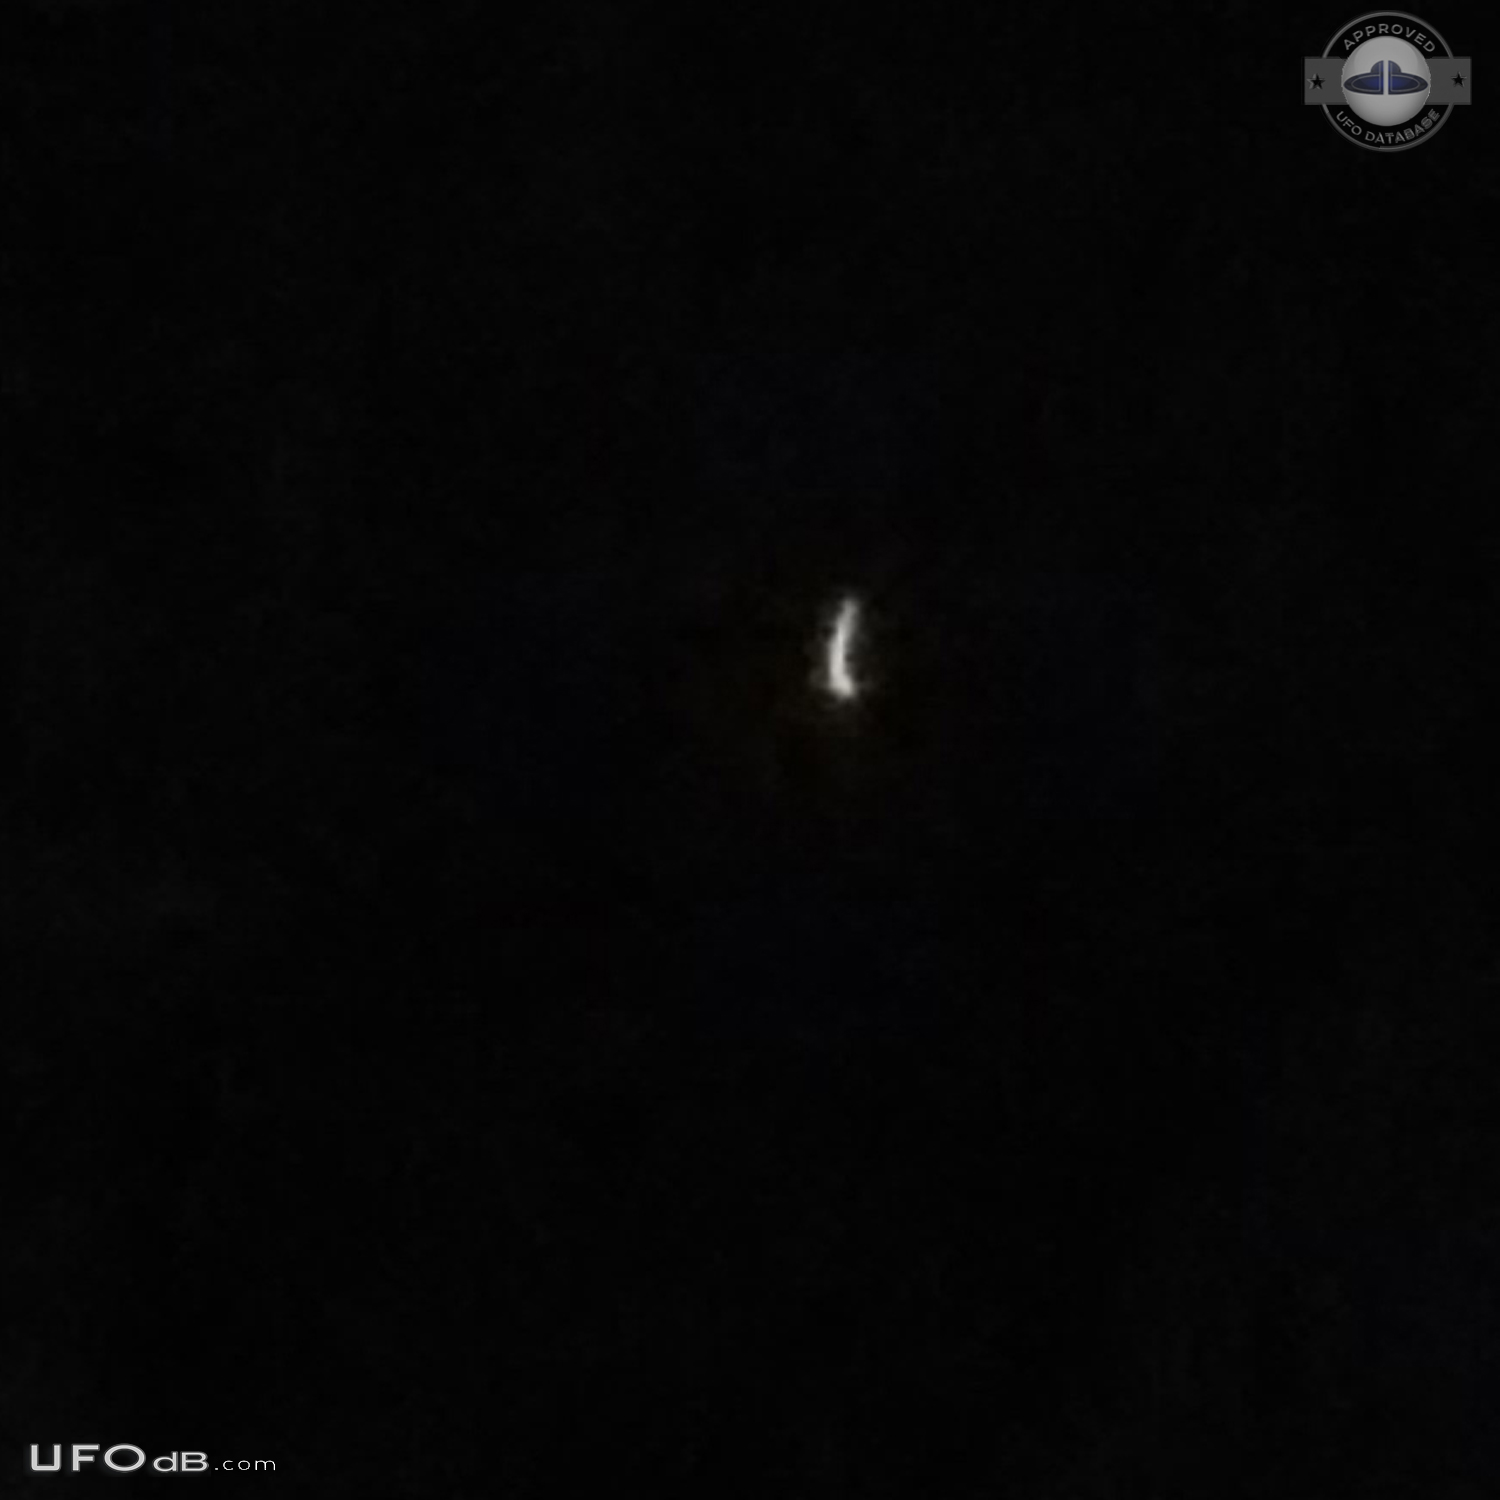 Looked like a star far, closer you could see it was UFO triangle with  UFO Picture #724-4